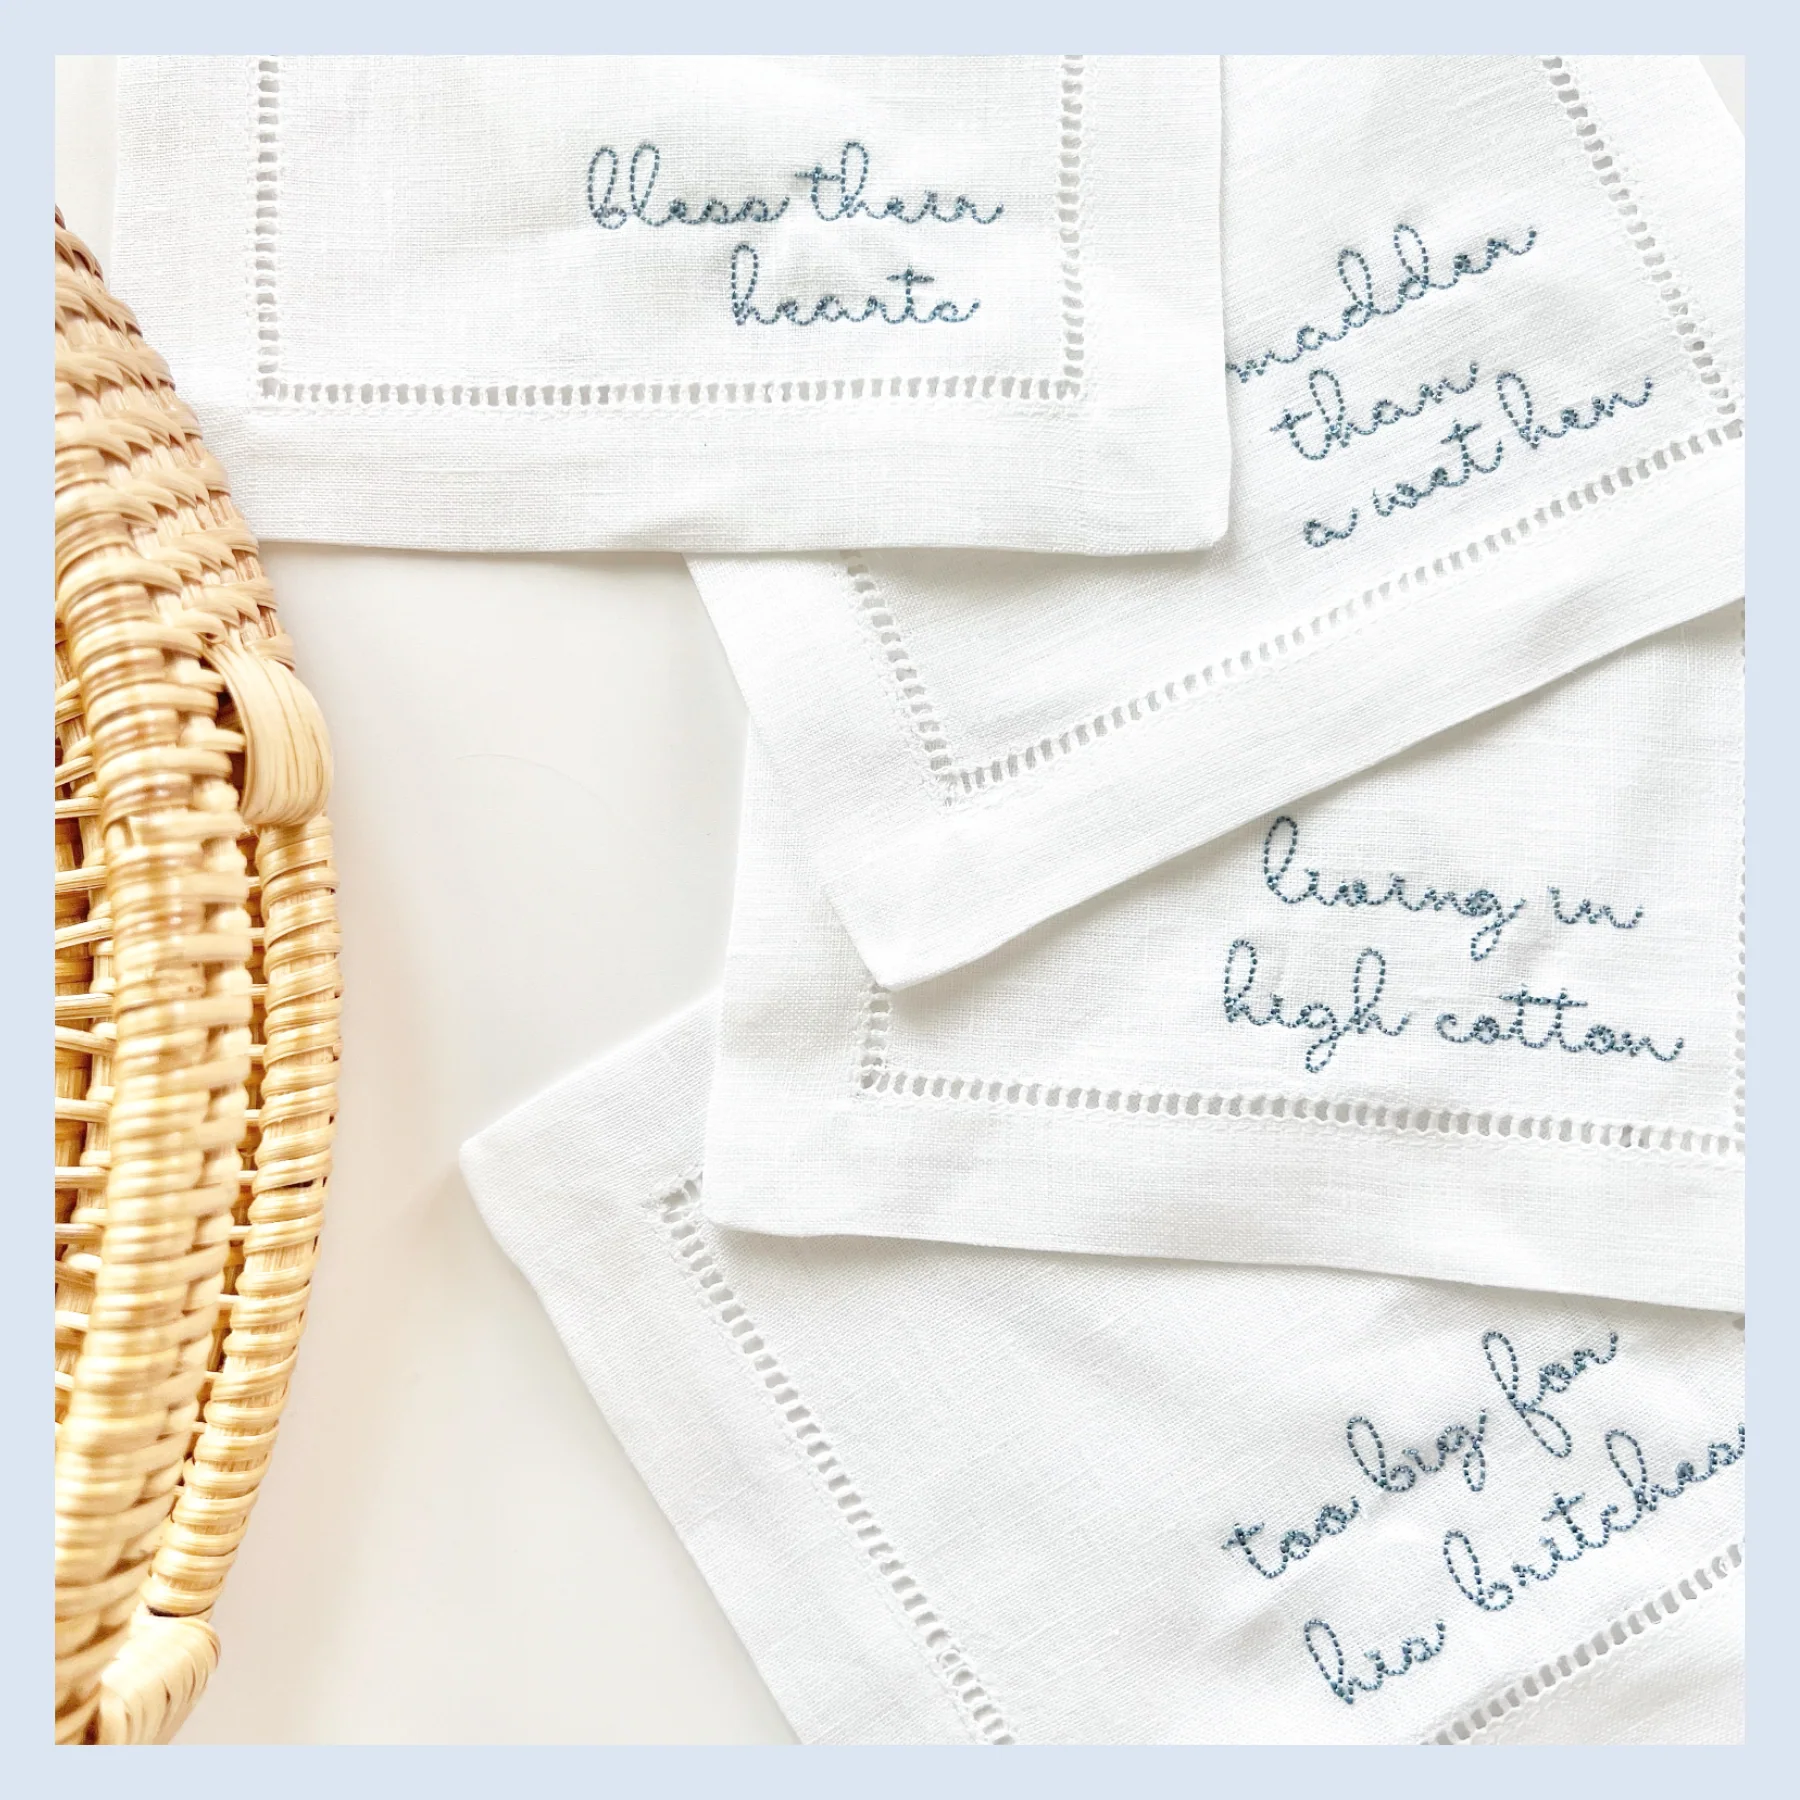 Four cocktail napkins have sassy southern sayings embroidered on them.